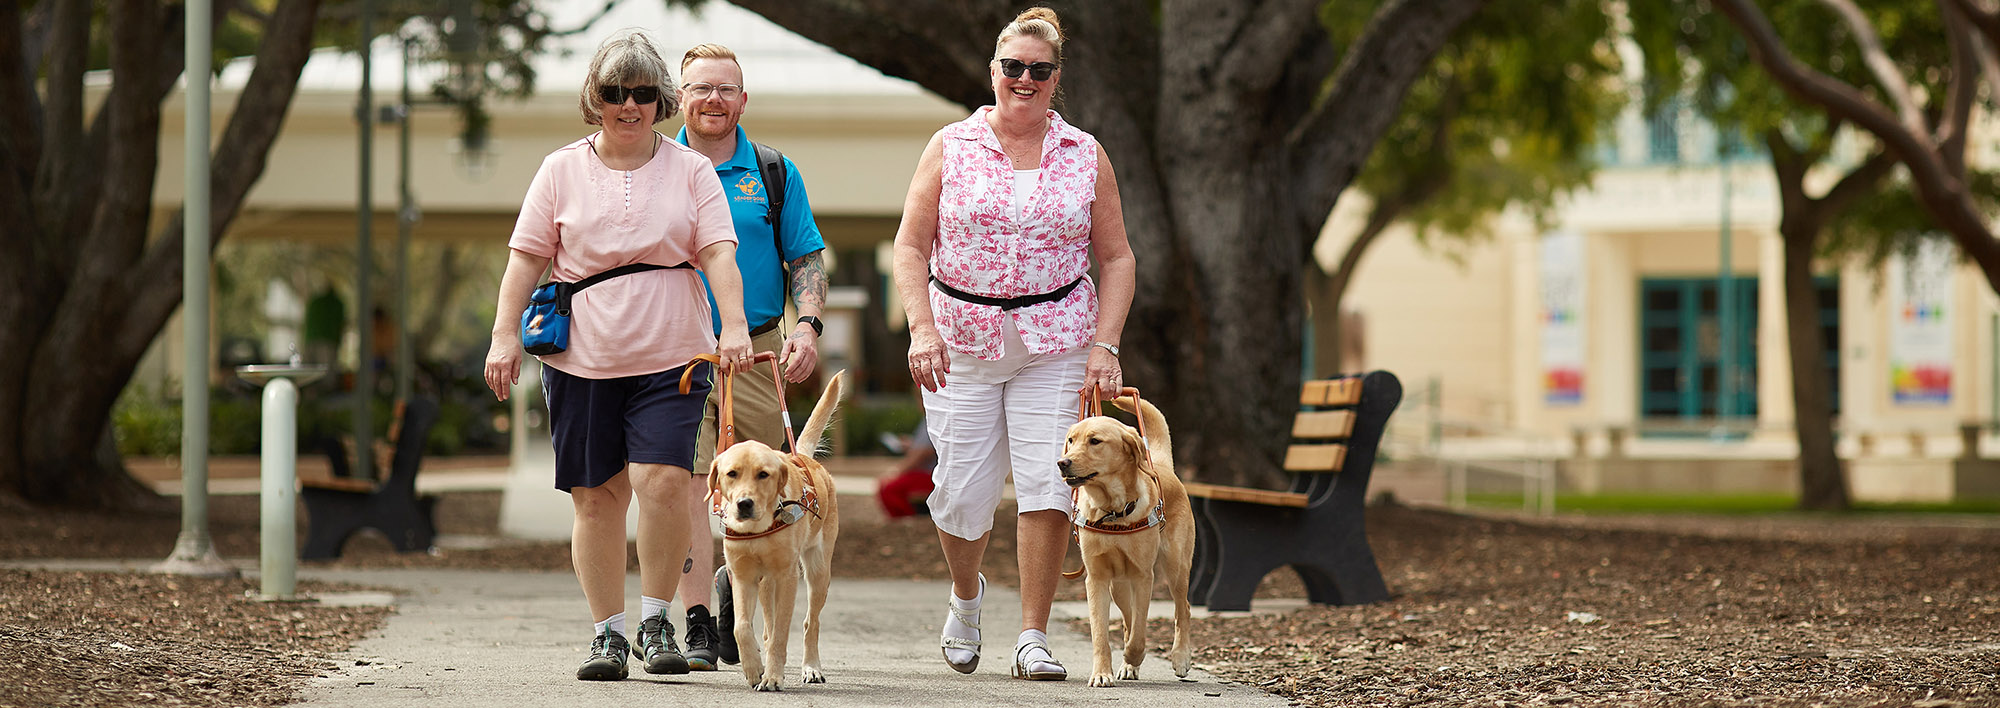 Two women walk down a sidewalk in a park-like setting toward the camera. They are smiling and both walking with Leader Dogs in harness. Behind them is a man wearing a bright blue polo with the Leader Dog logo on it